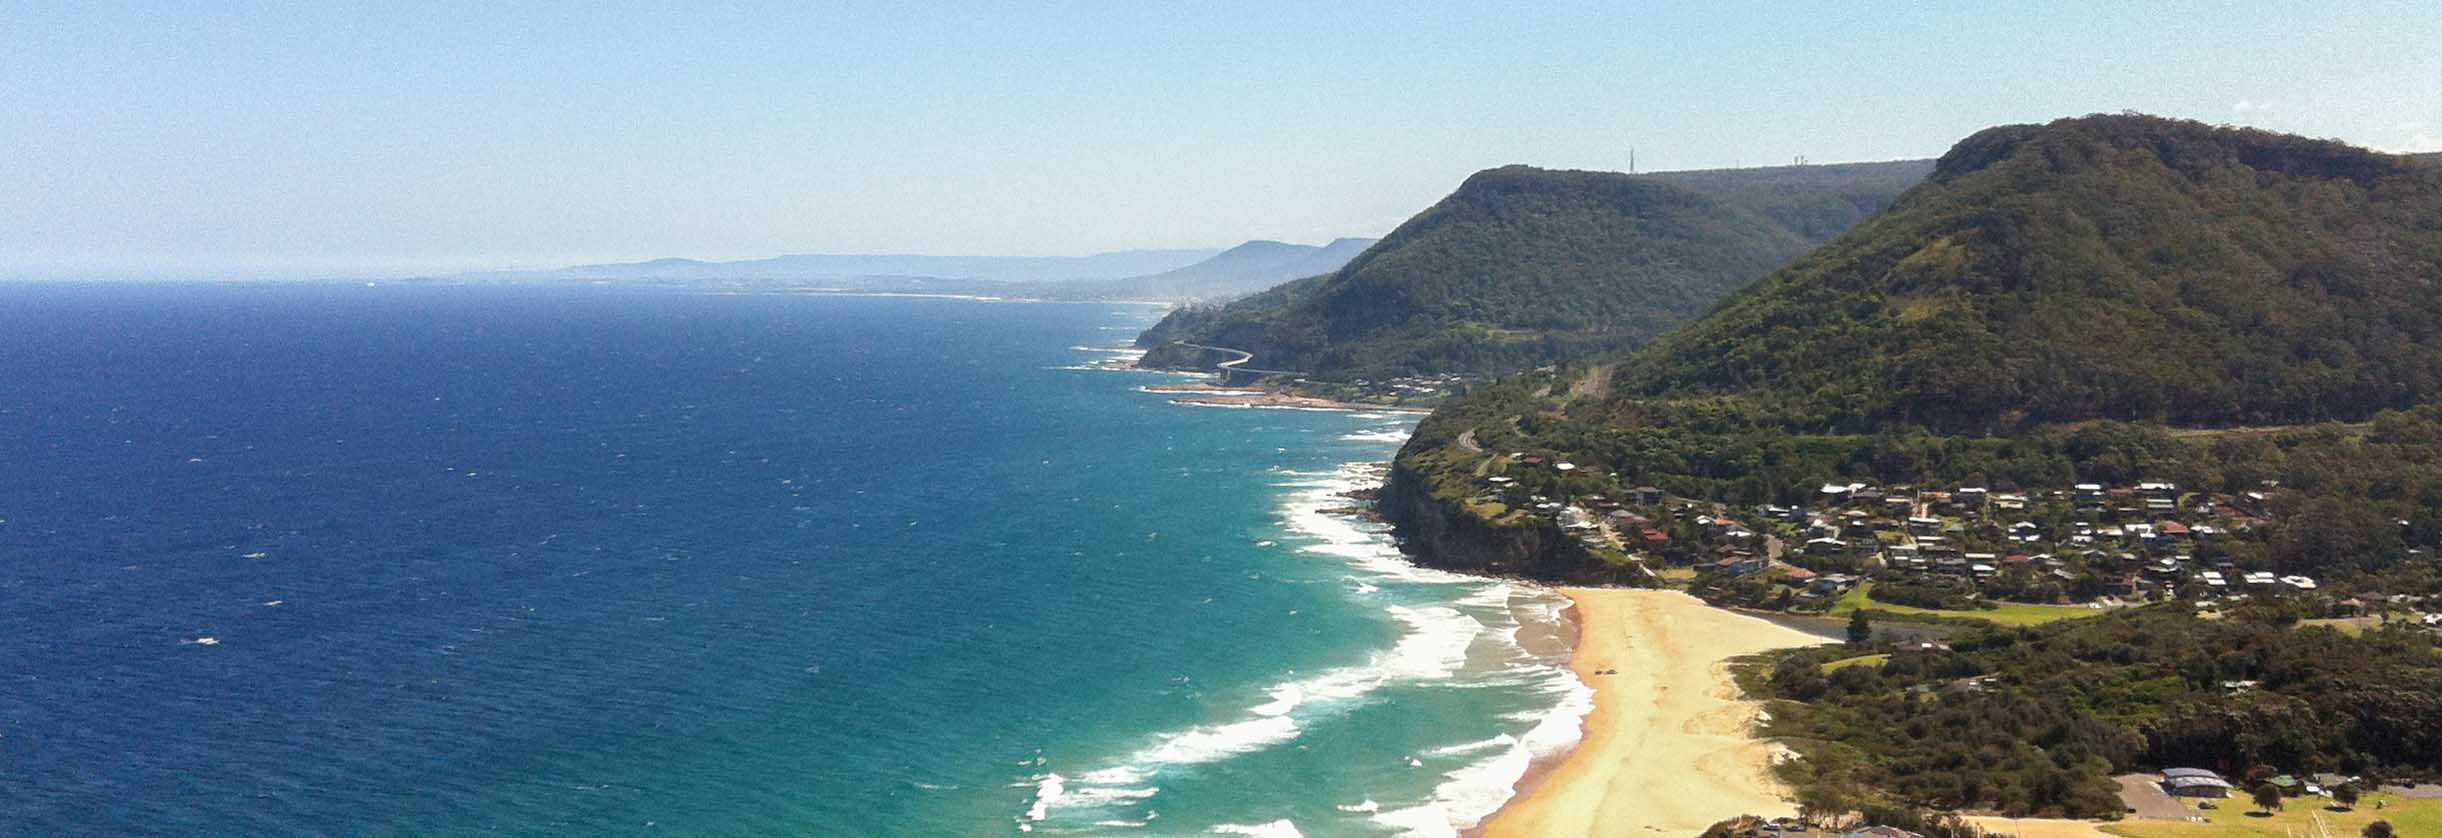 top_things_to_do_the_royal_national_park_stanwell_tops_world_travel_bound